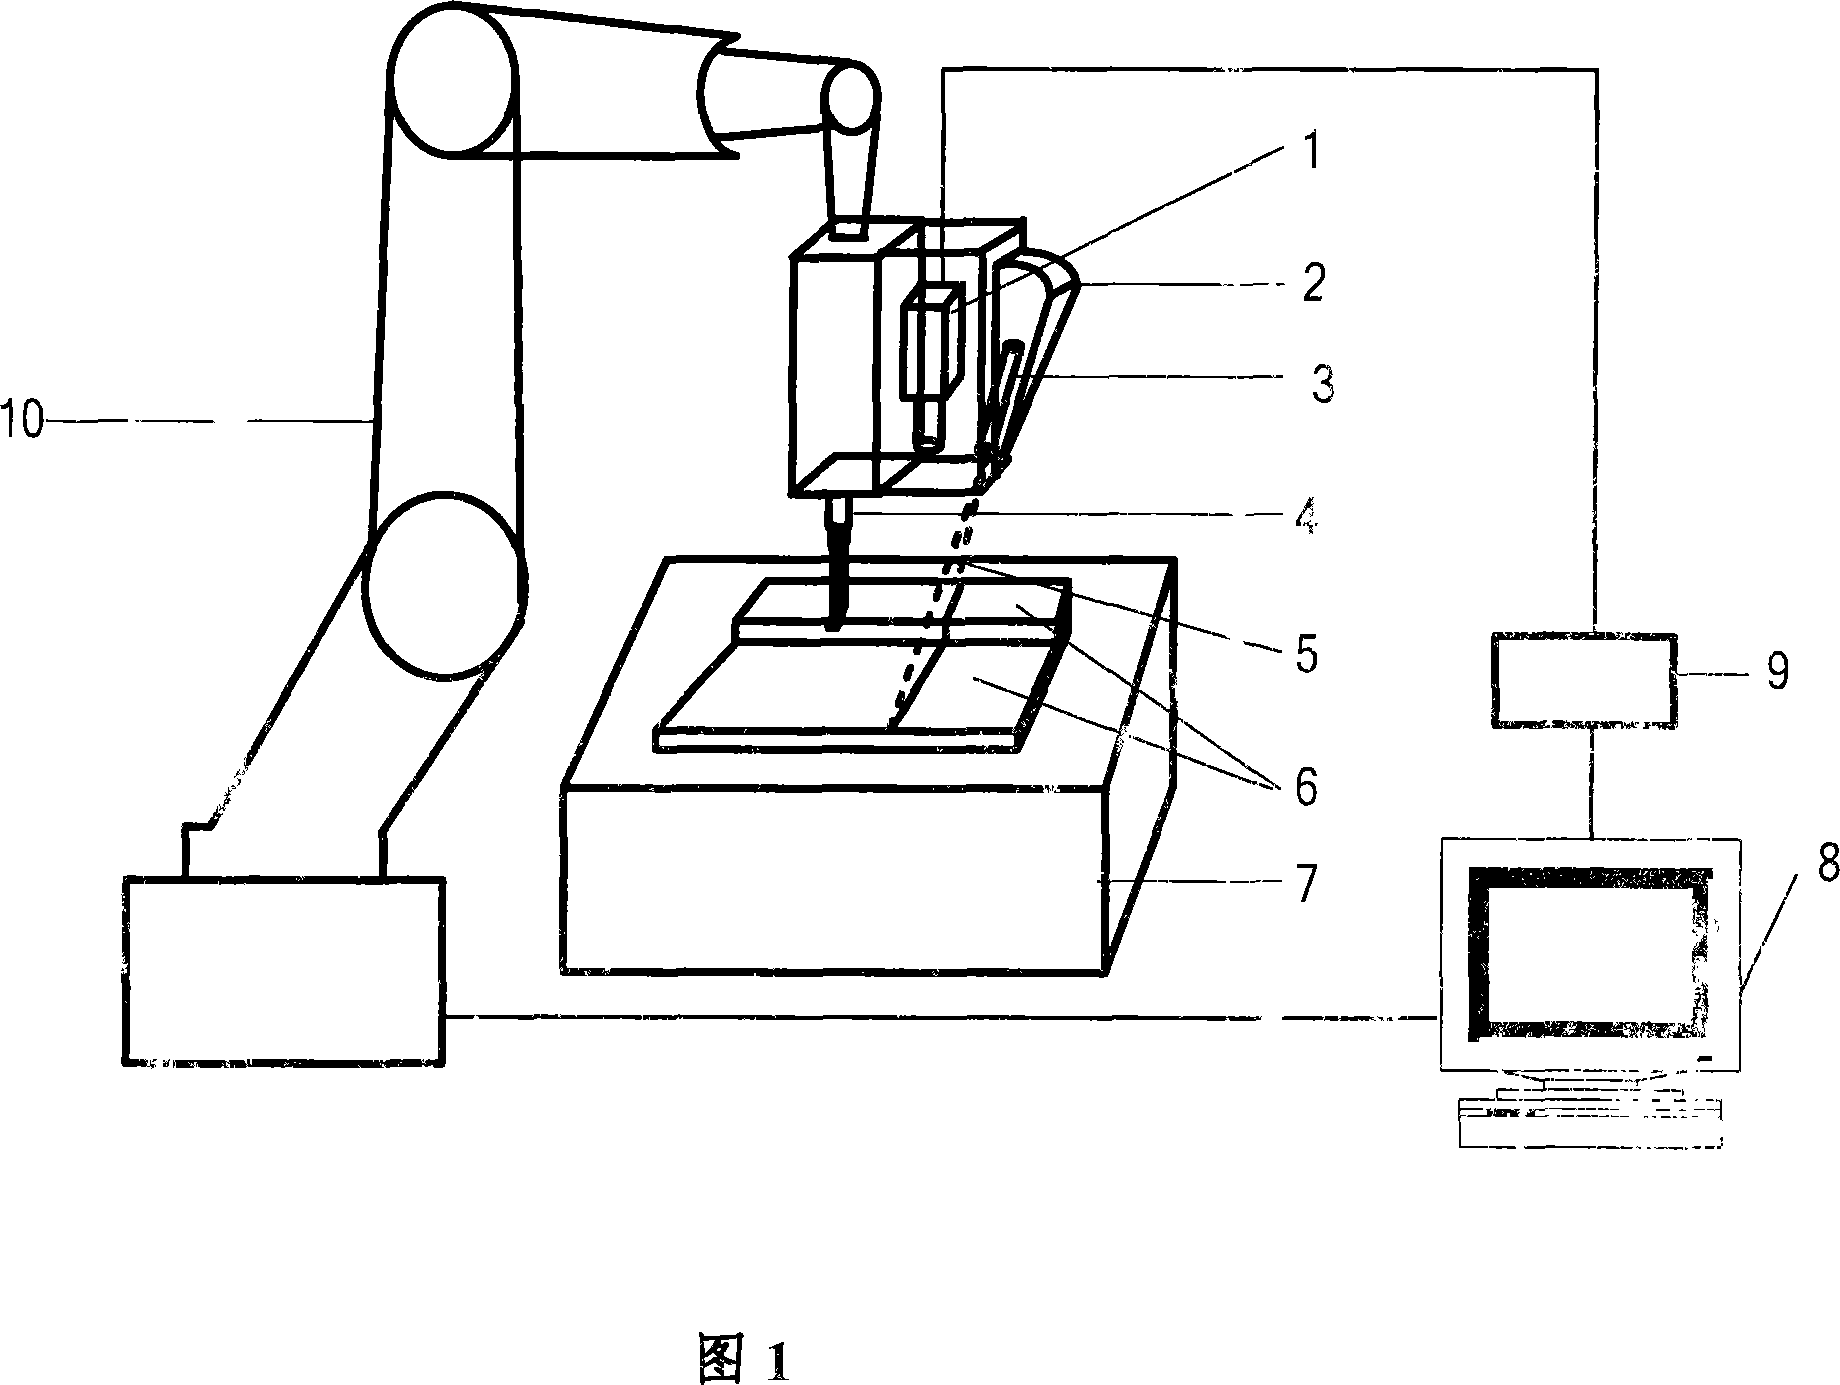 Robot sewing system for three-dimensional composite material perform